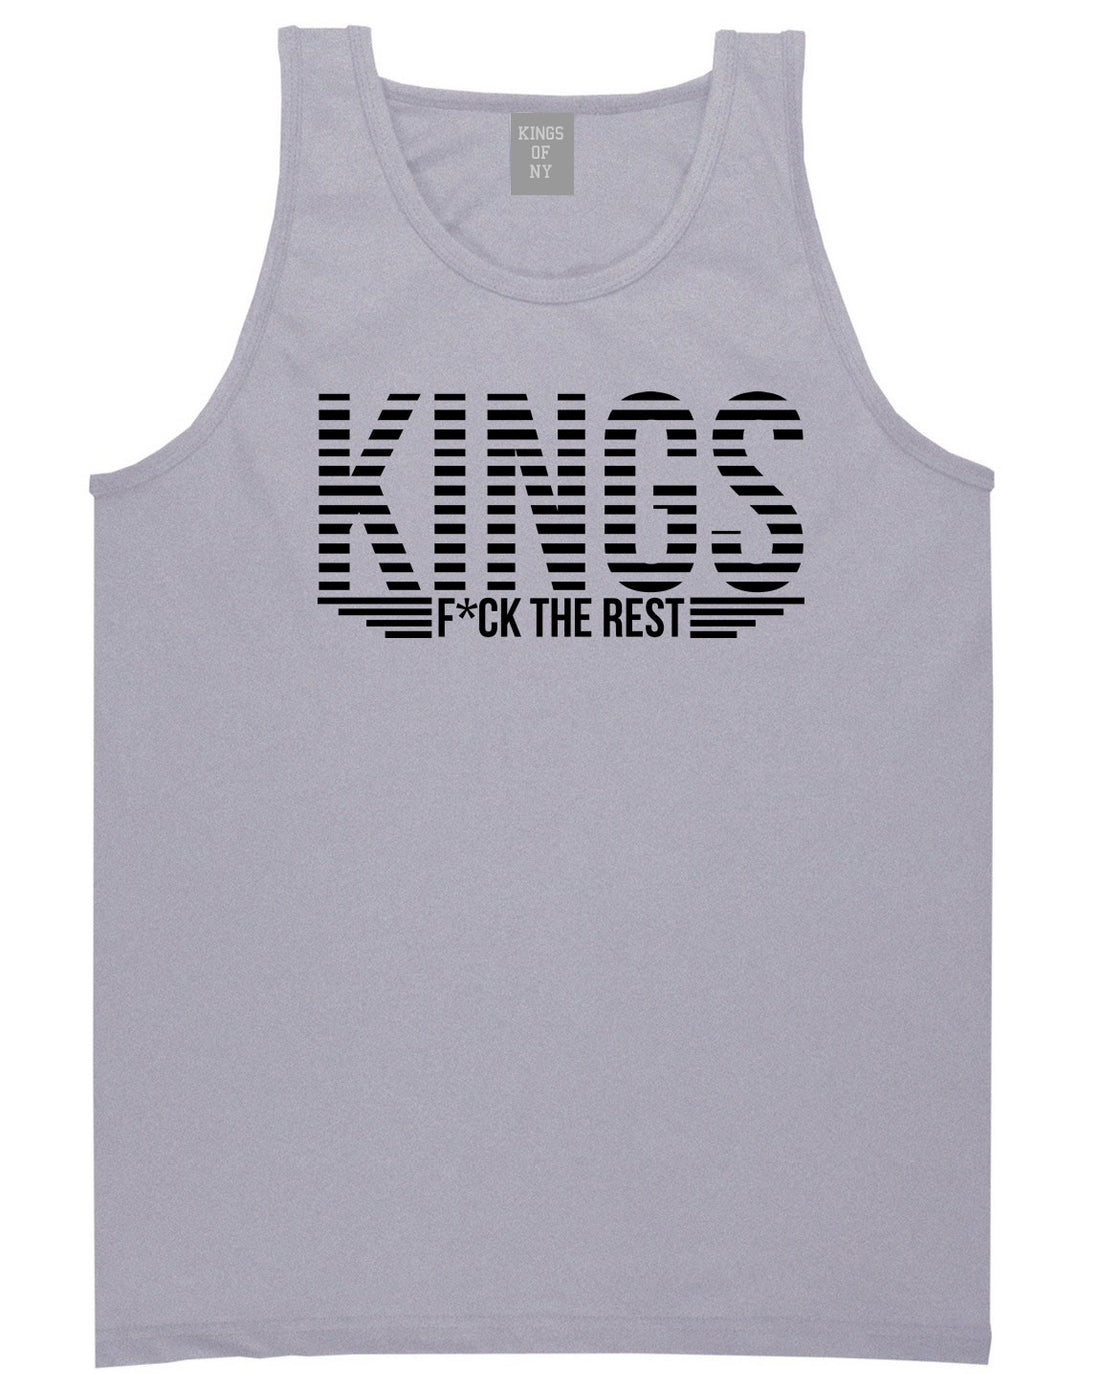 Kings Of NY New York Logo F the Rest Tank Top in Grey